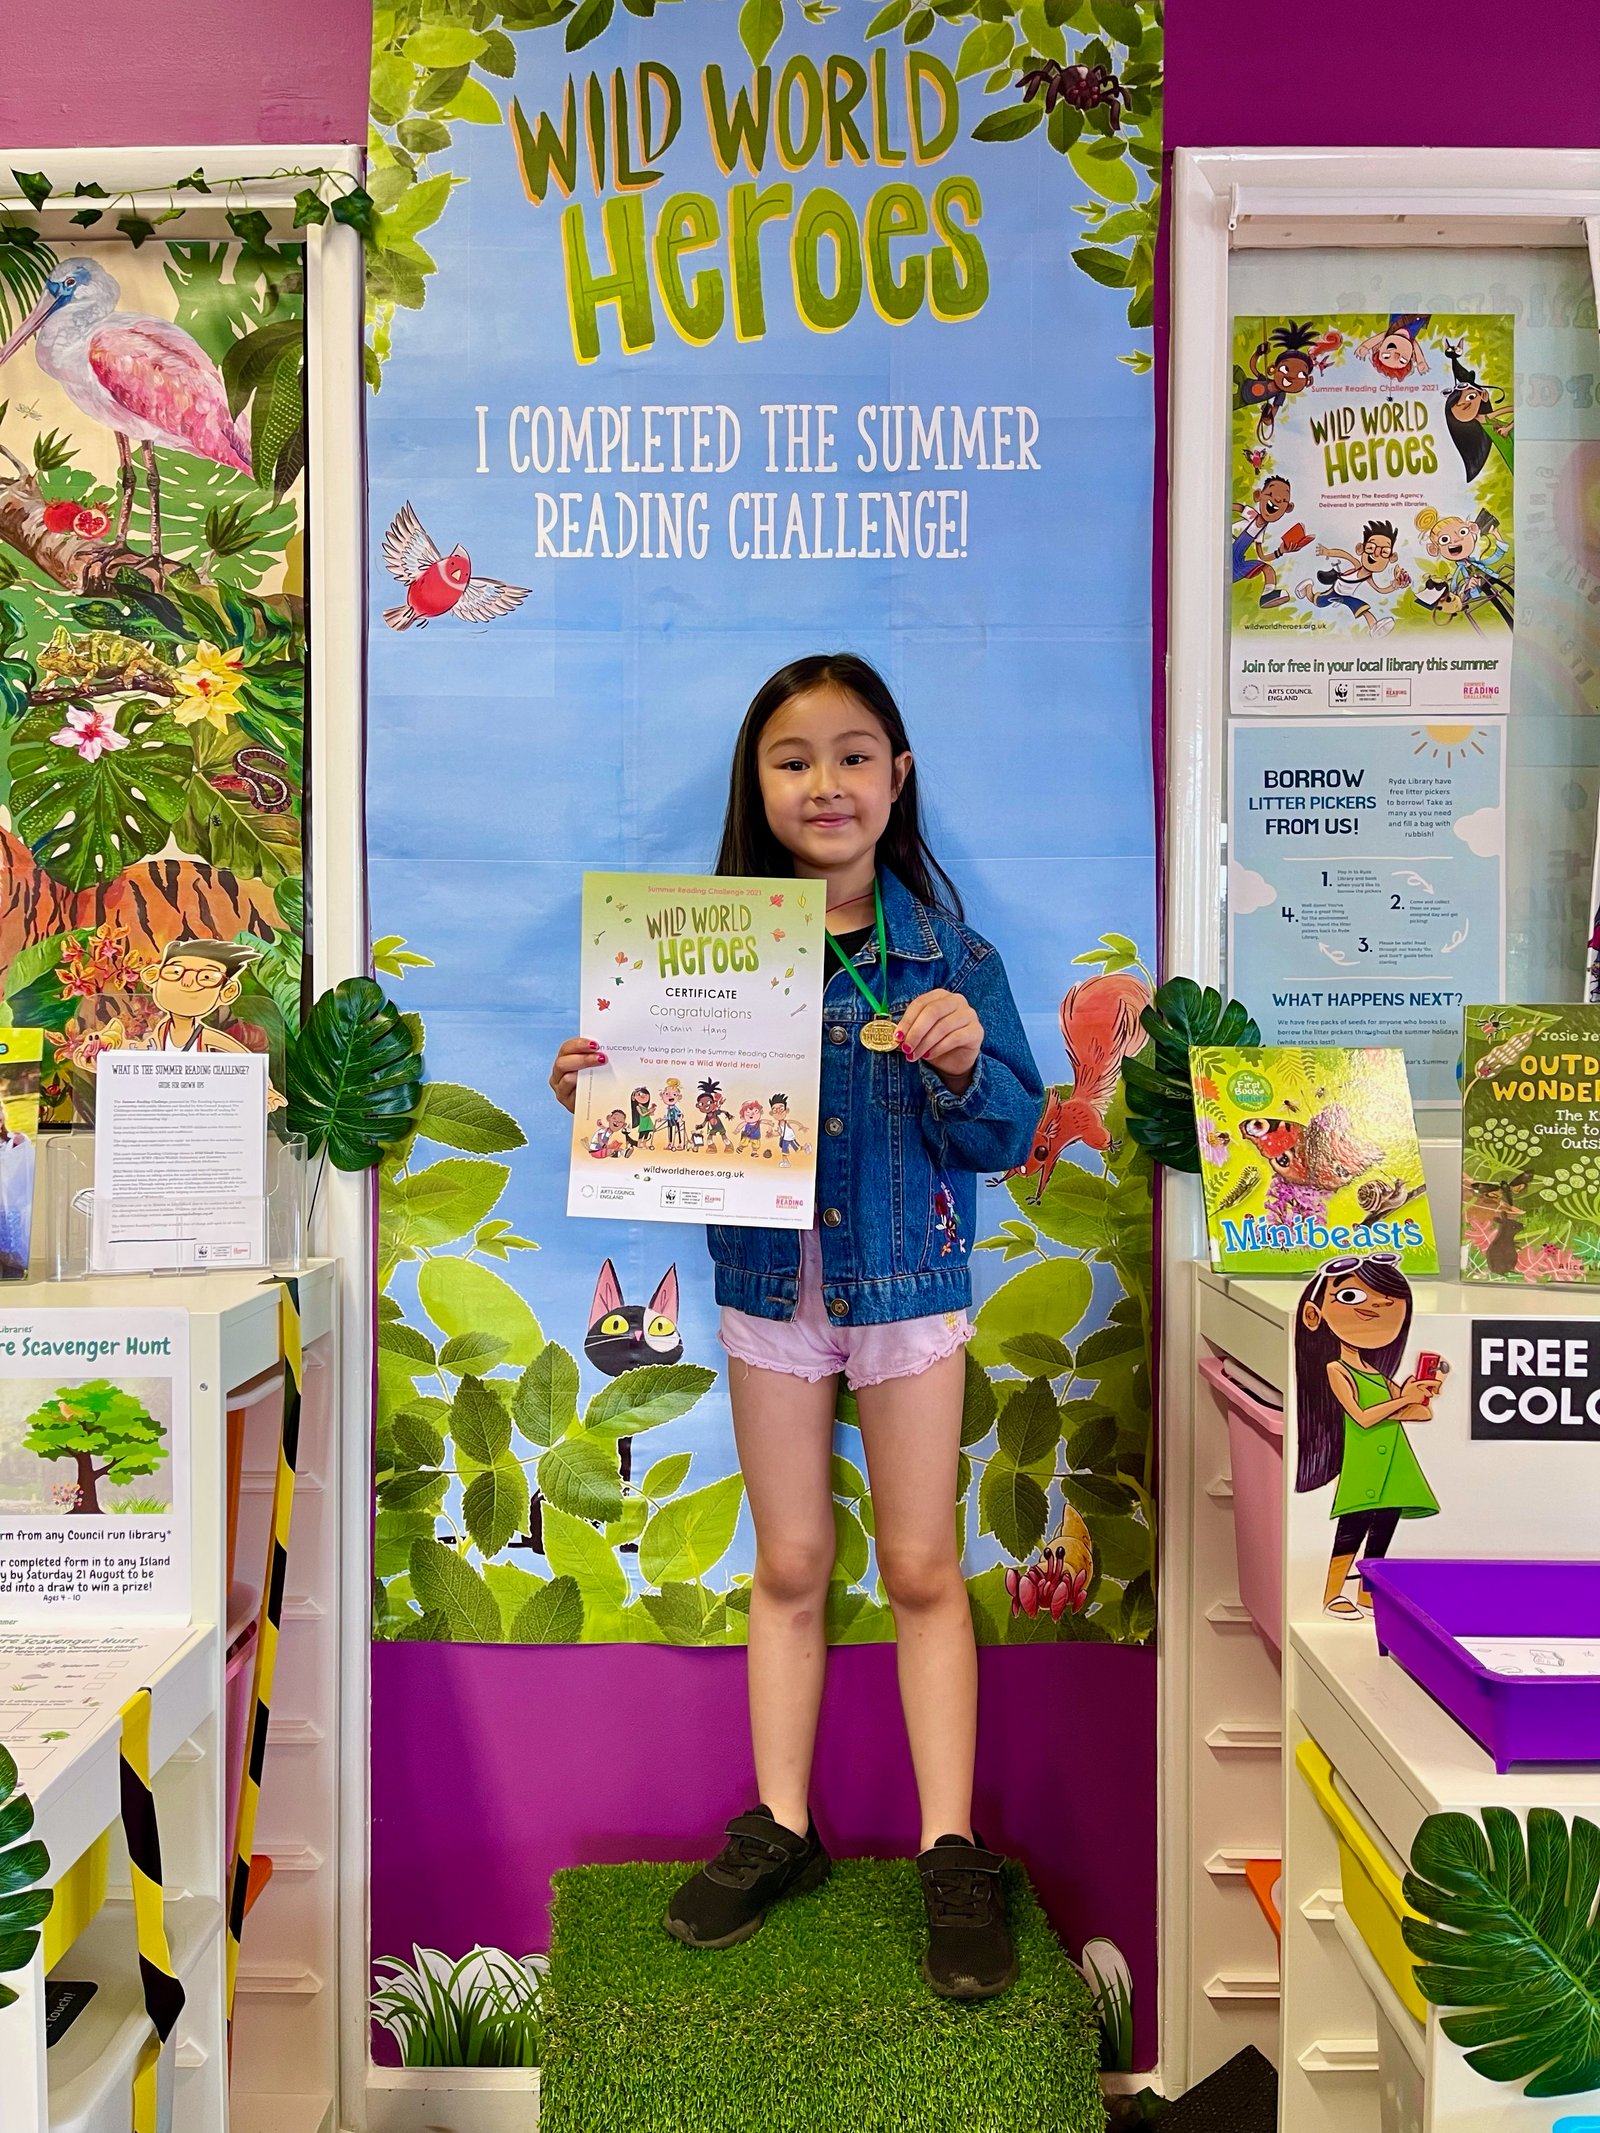 Lei Hang's daughter Yasmin completed the Summer Reading Challenge 2021 Wild World Heroes.